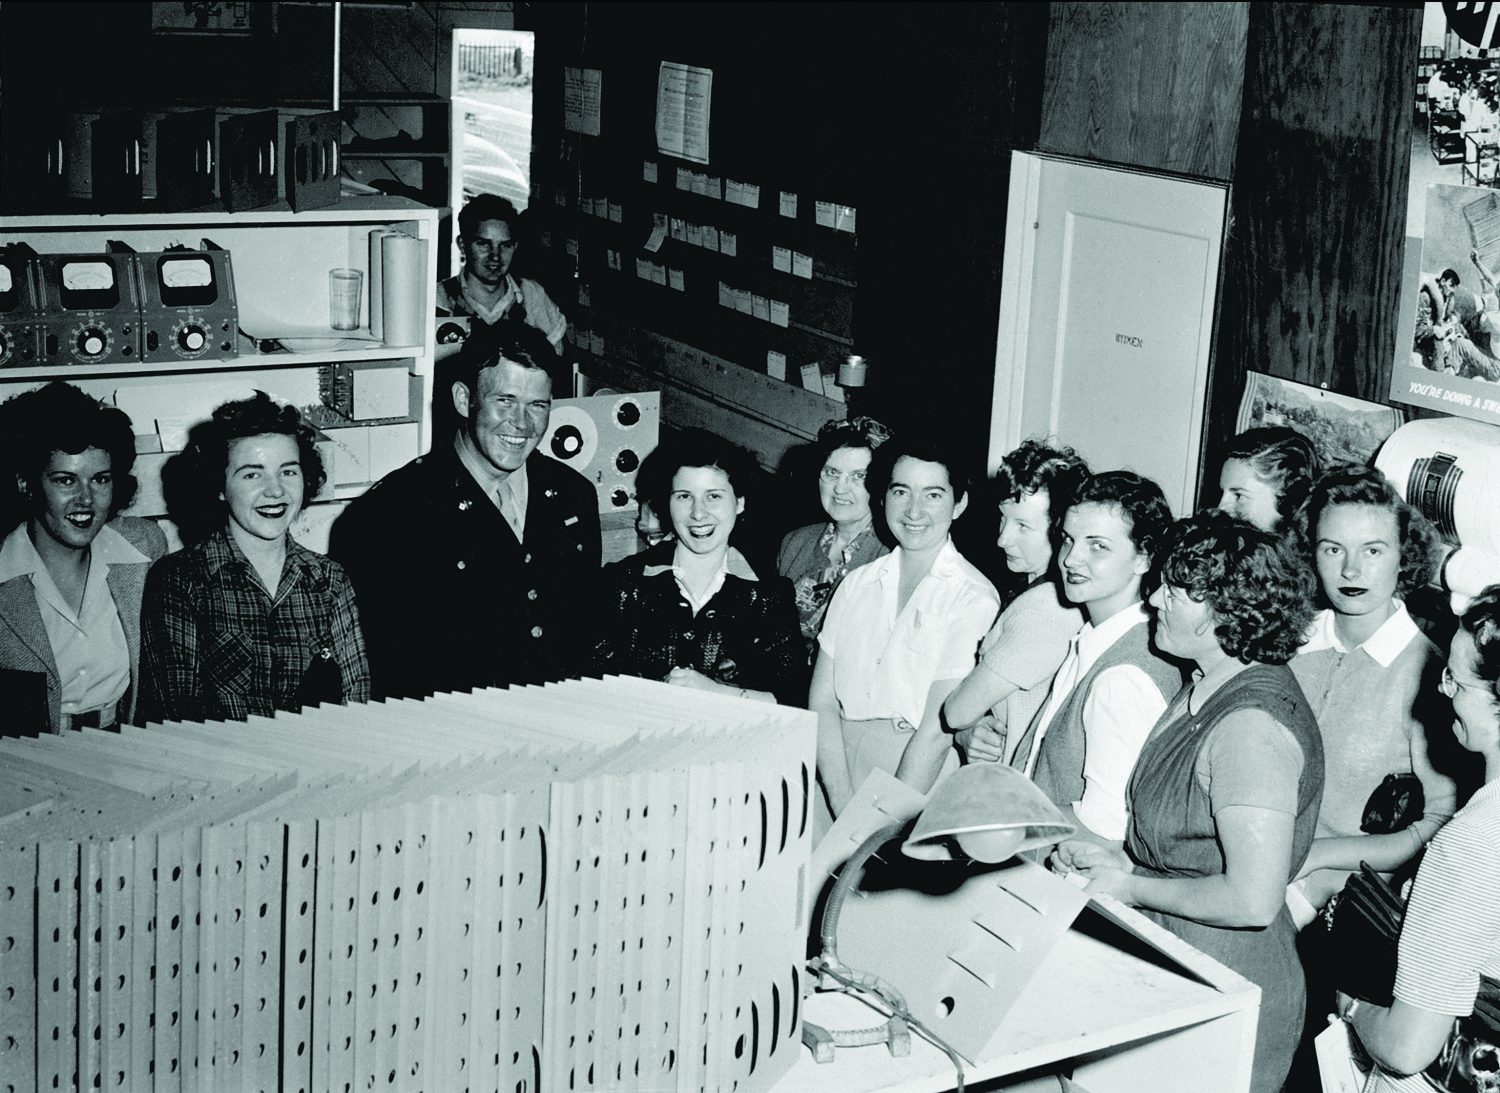 Bill Hewlett with a number of female employees during a visit to HP in 1944 when he was a major in the Army.